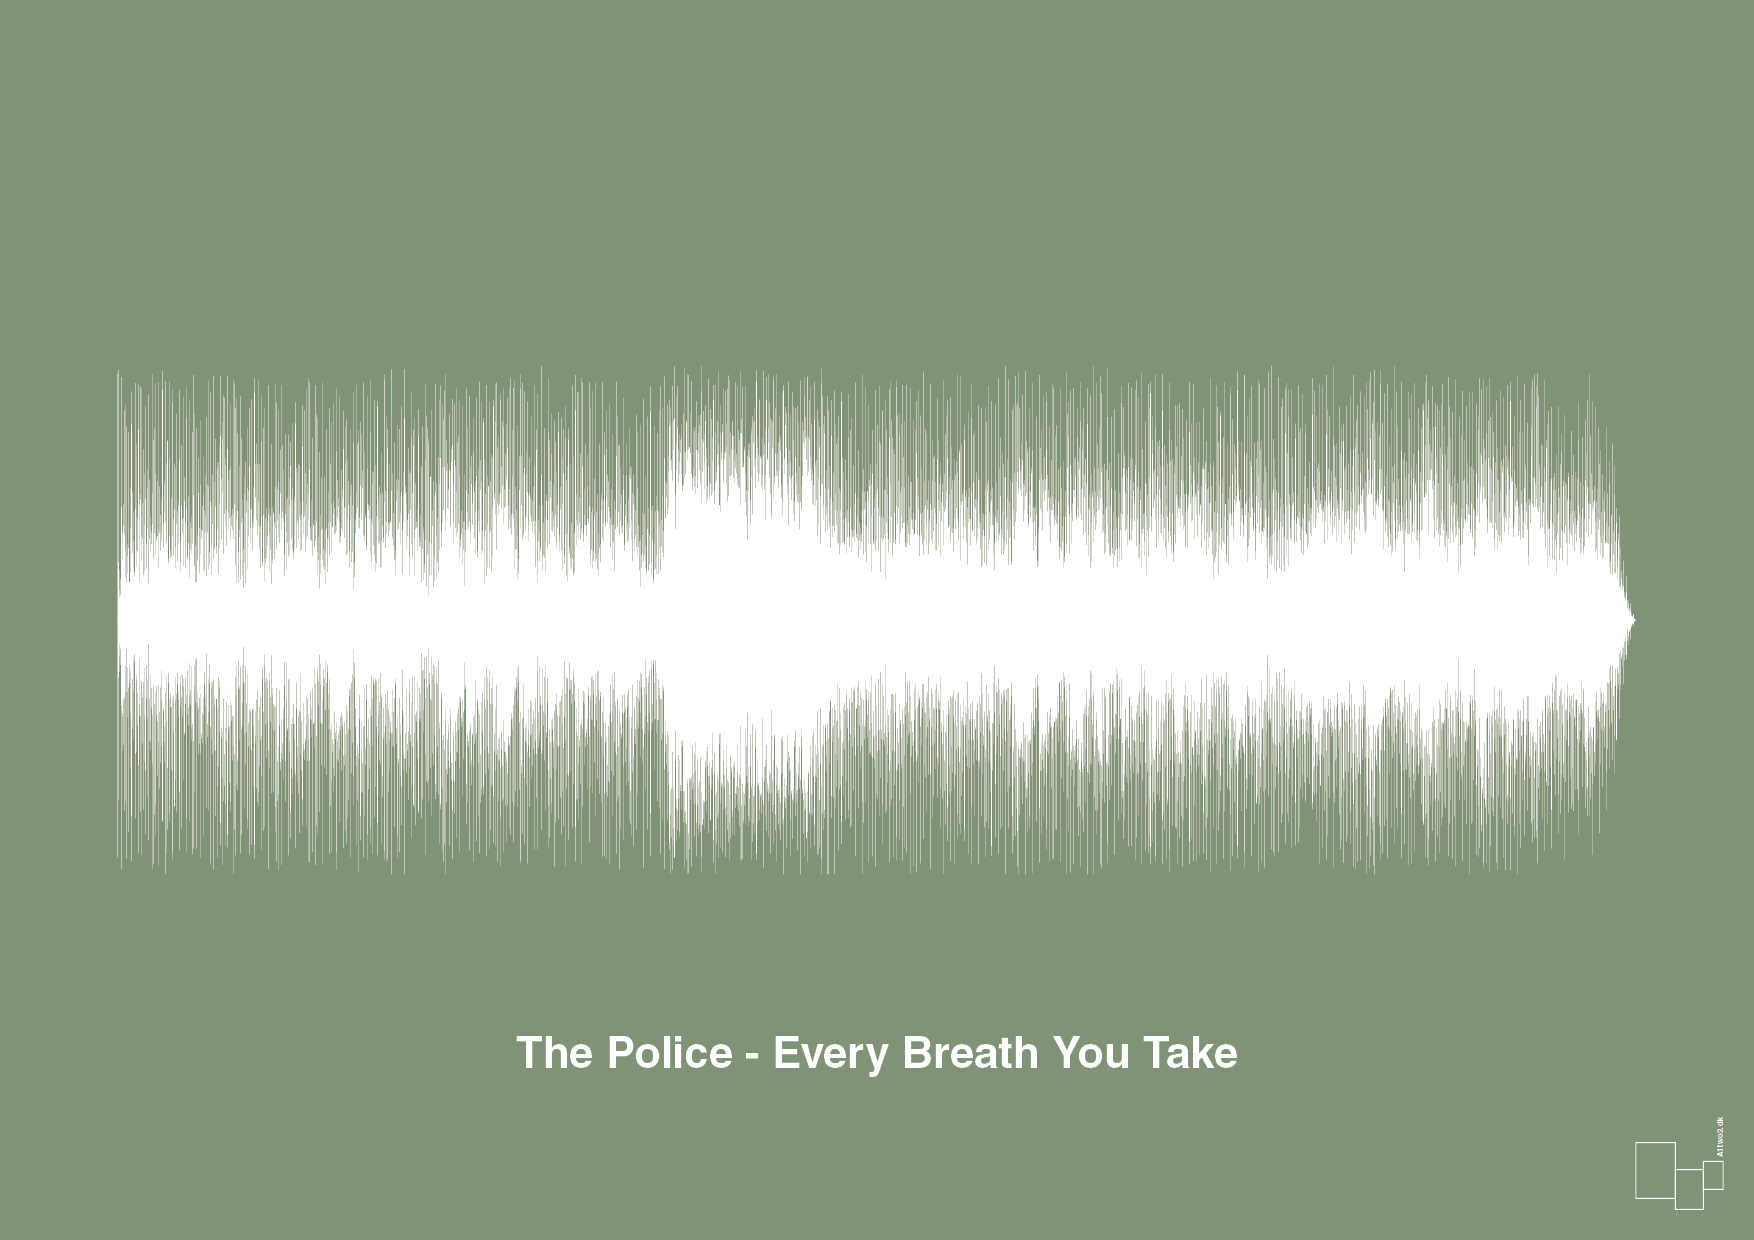 the police - every breath you take - Plakat med Musik i Jade